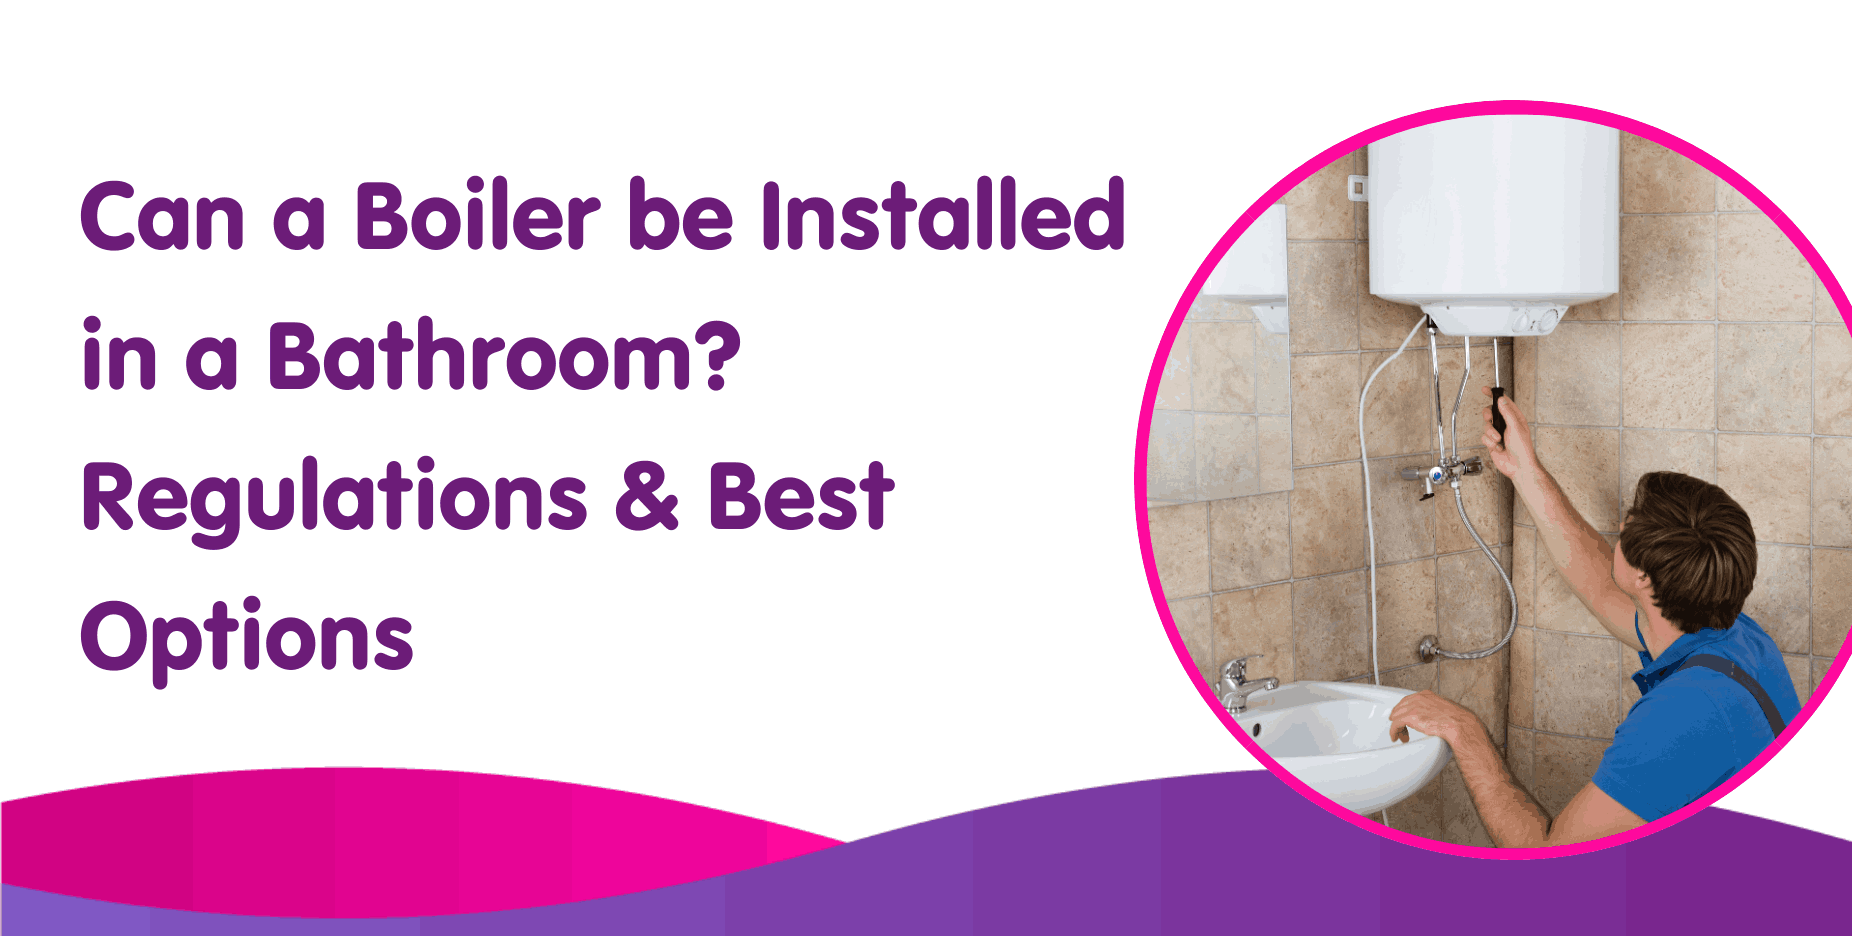 Can a Boiler be Installed in a Bathroom? Regulations & Best Options